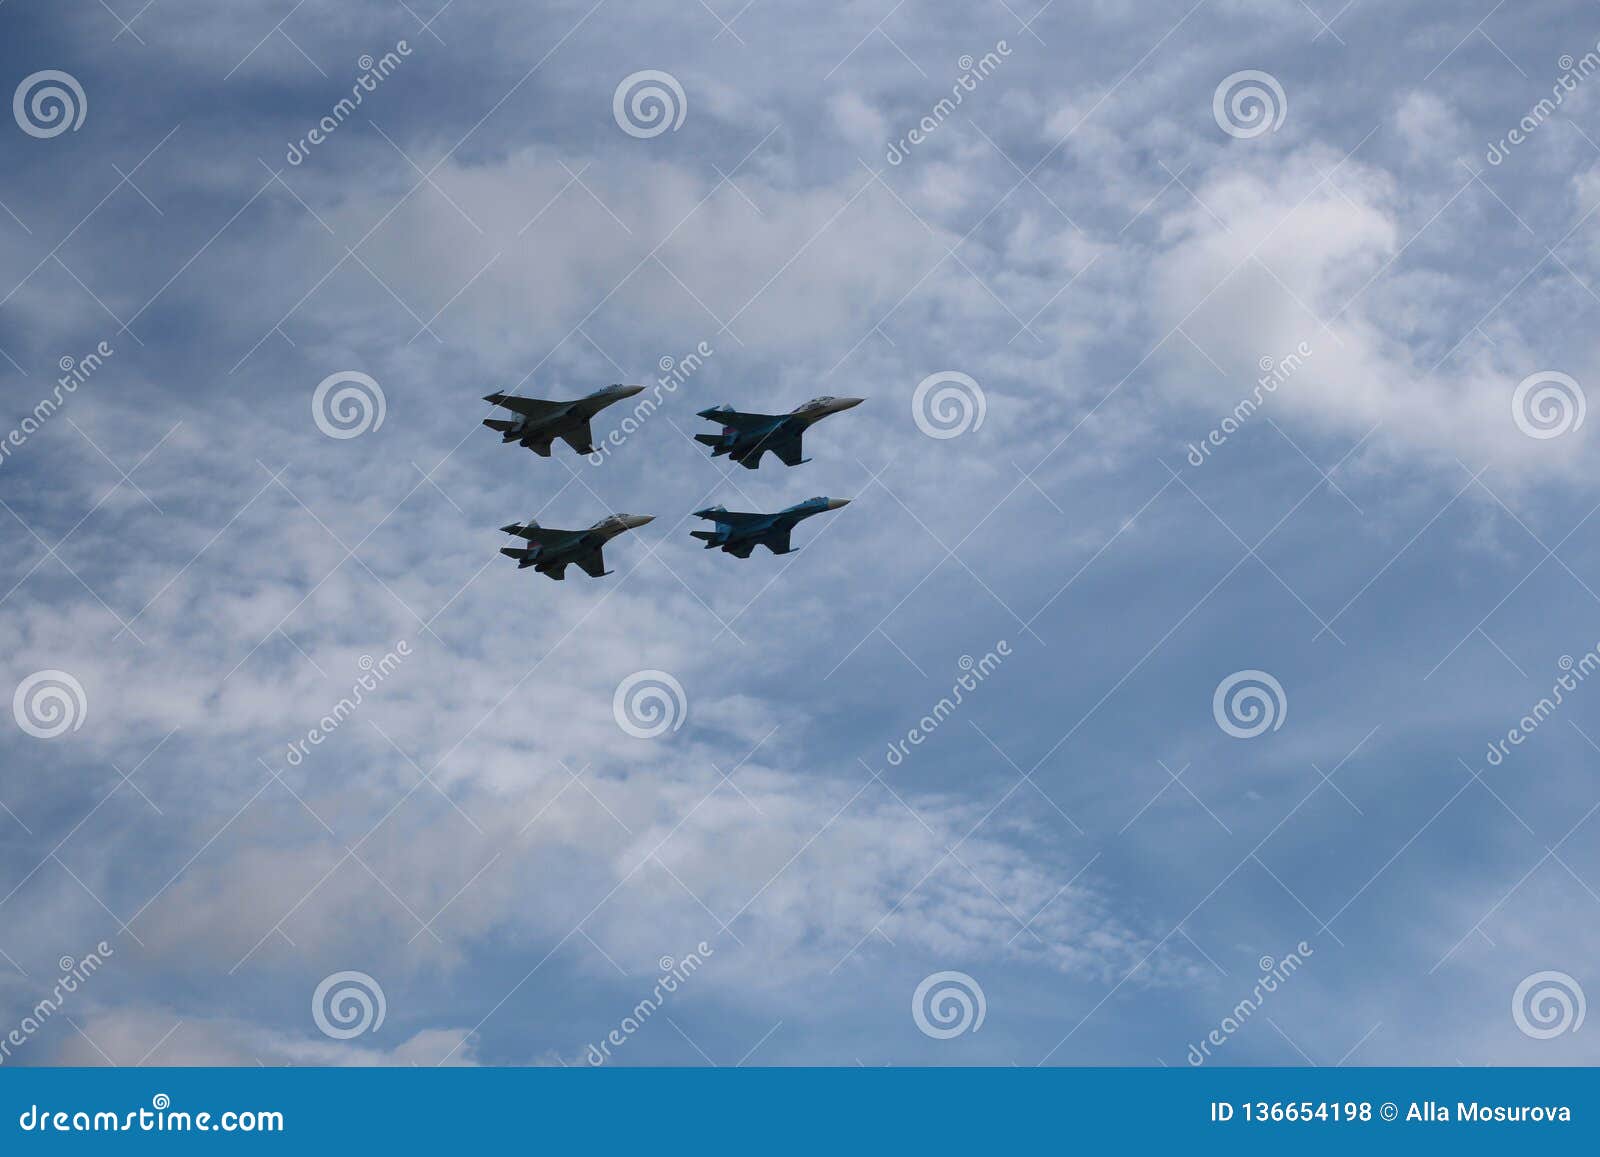 Four Aircraft Combat Fighters a Great Strong Powerful SU-34 Military ...